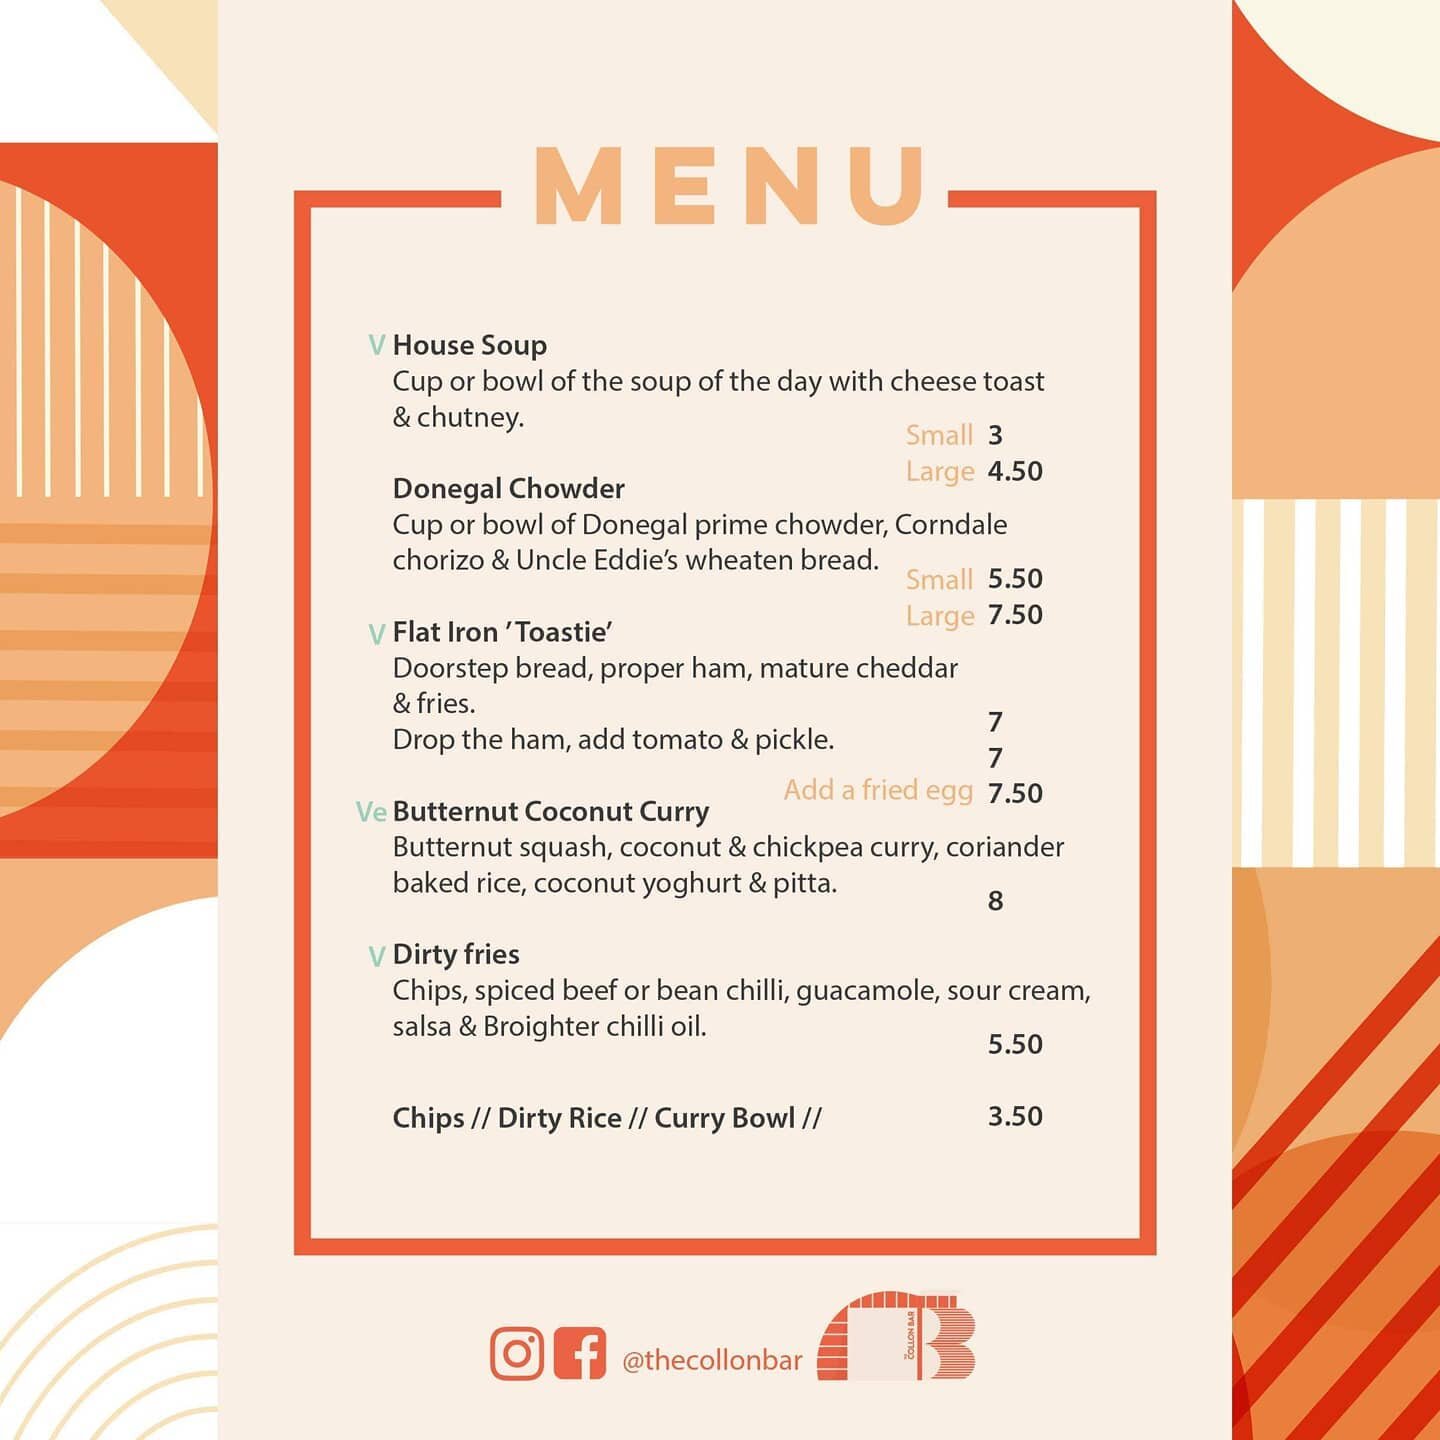 On the quieter days of Tuesday and Wednesday, we have a more condensed menu, with all your weekday favourites!
To view our more extensive Thursday - Sunday menu, click on the link in our bio 🍳

#derry #visitderry #derrycity #thecollonbar #thecollon 